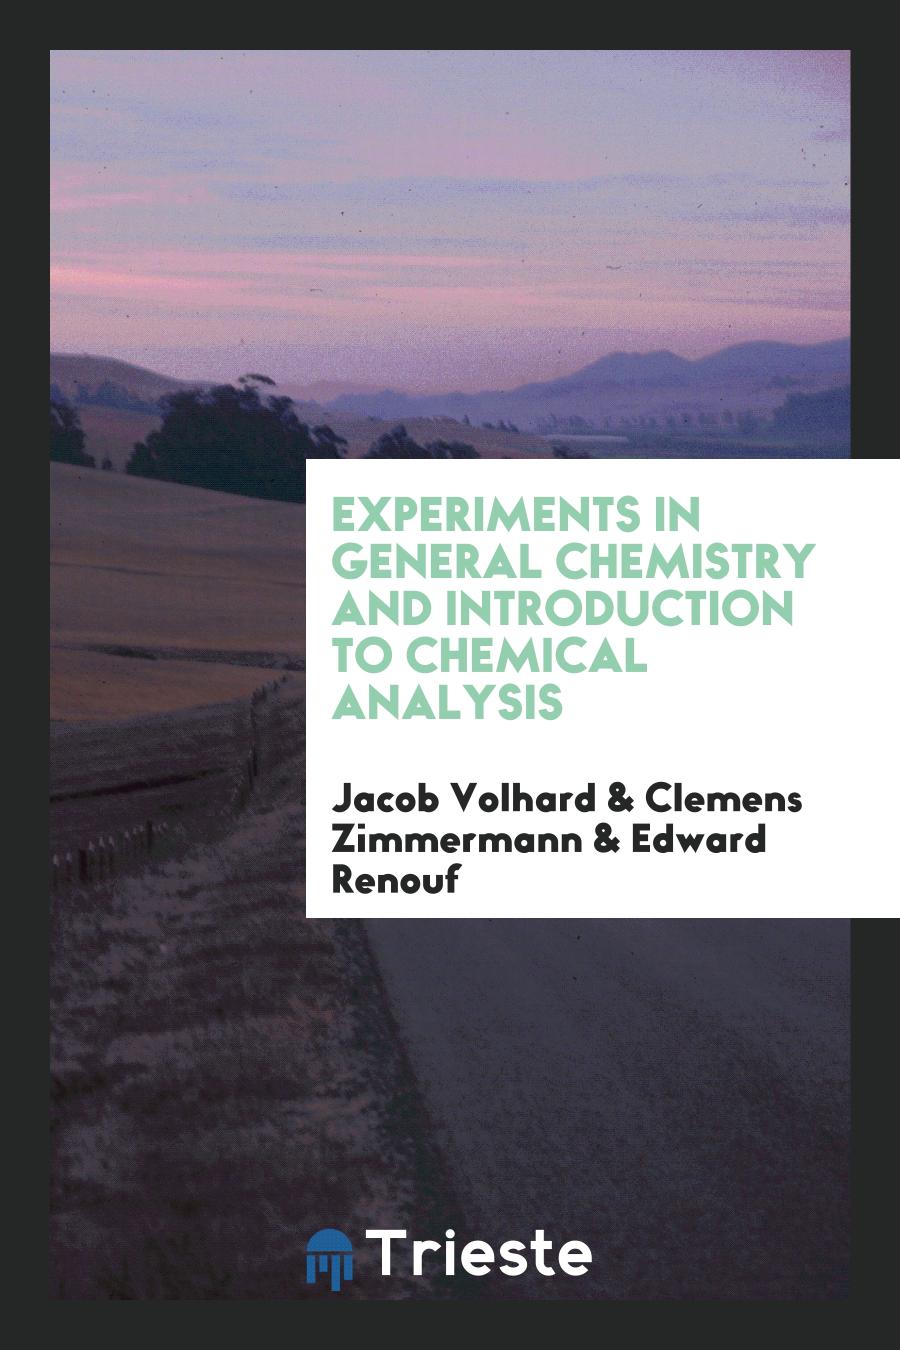 Experiments in General Chemistry and Introduction to Chemical Analysis